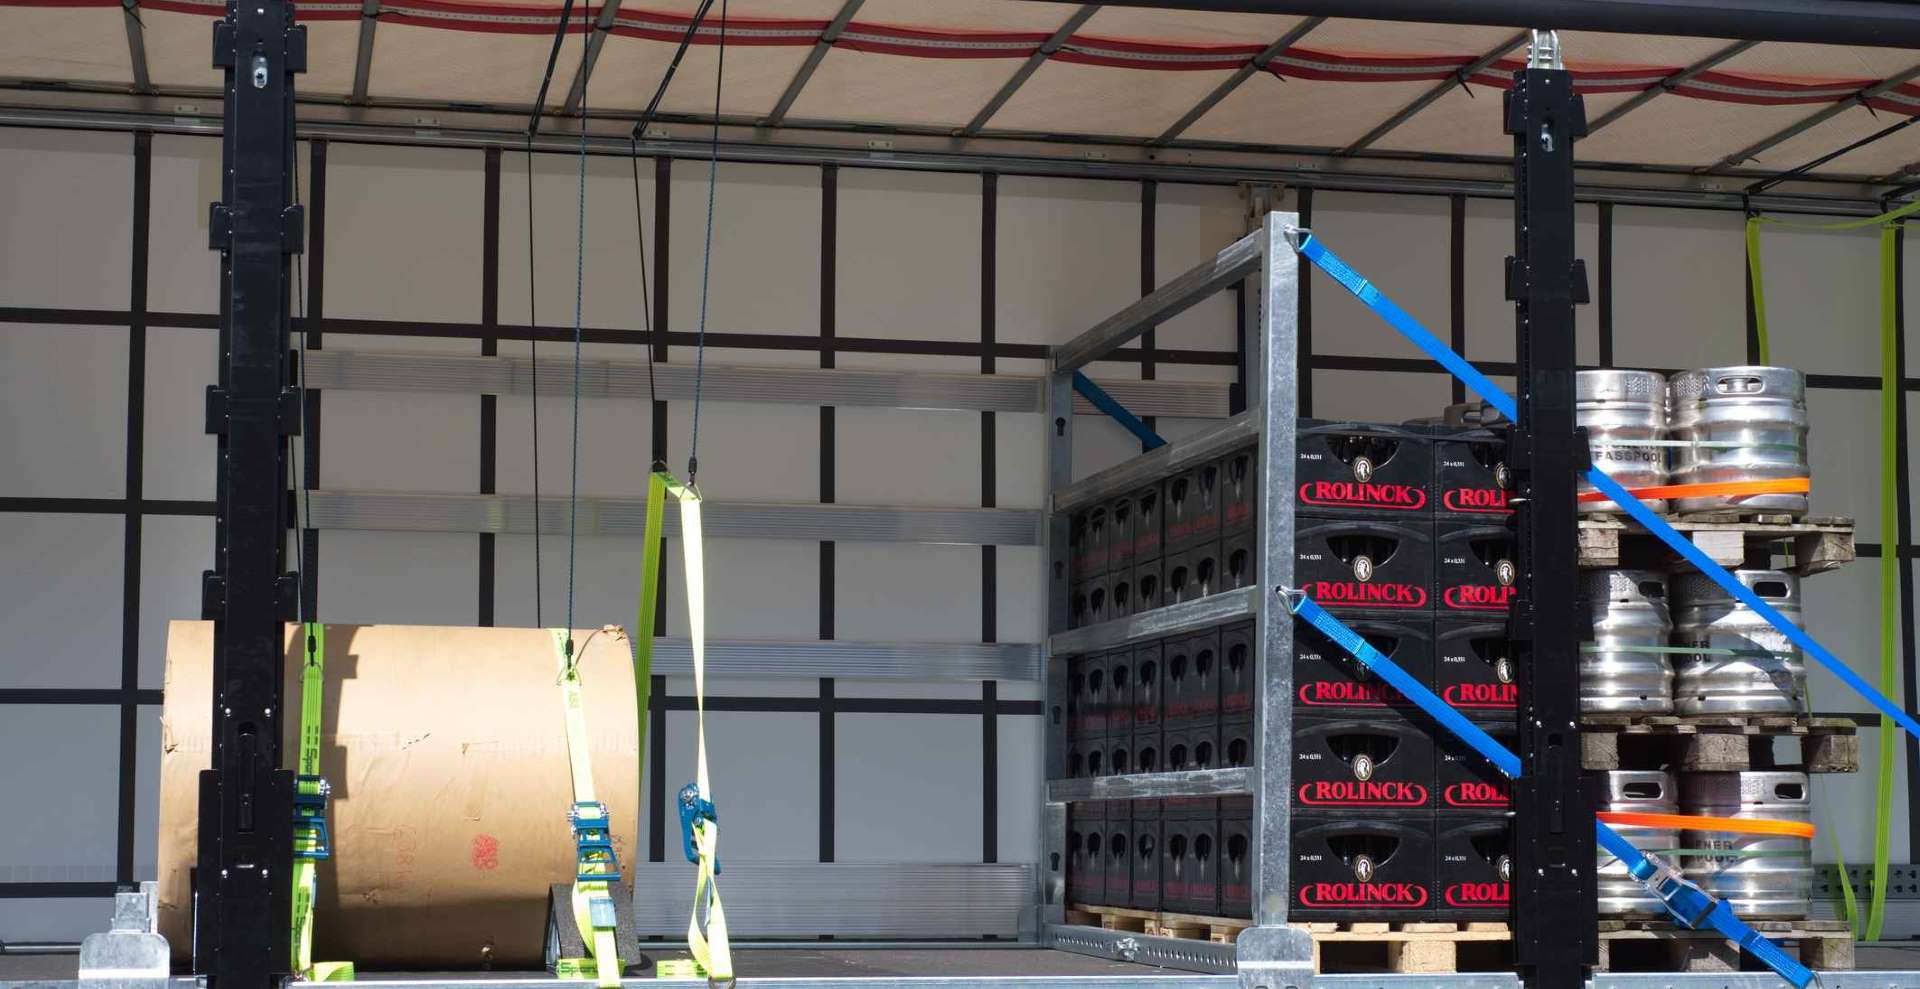 Flexible load securing options in the S.CS curtainsider semi-trailer